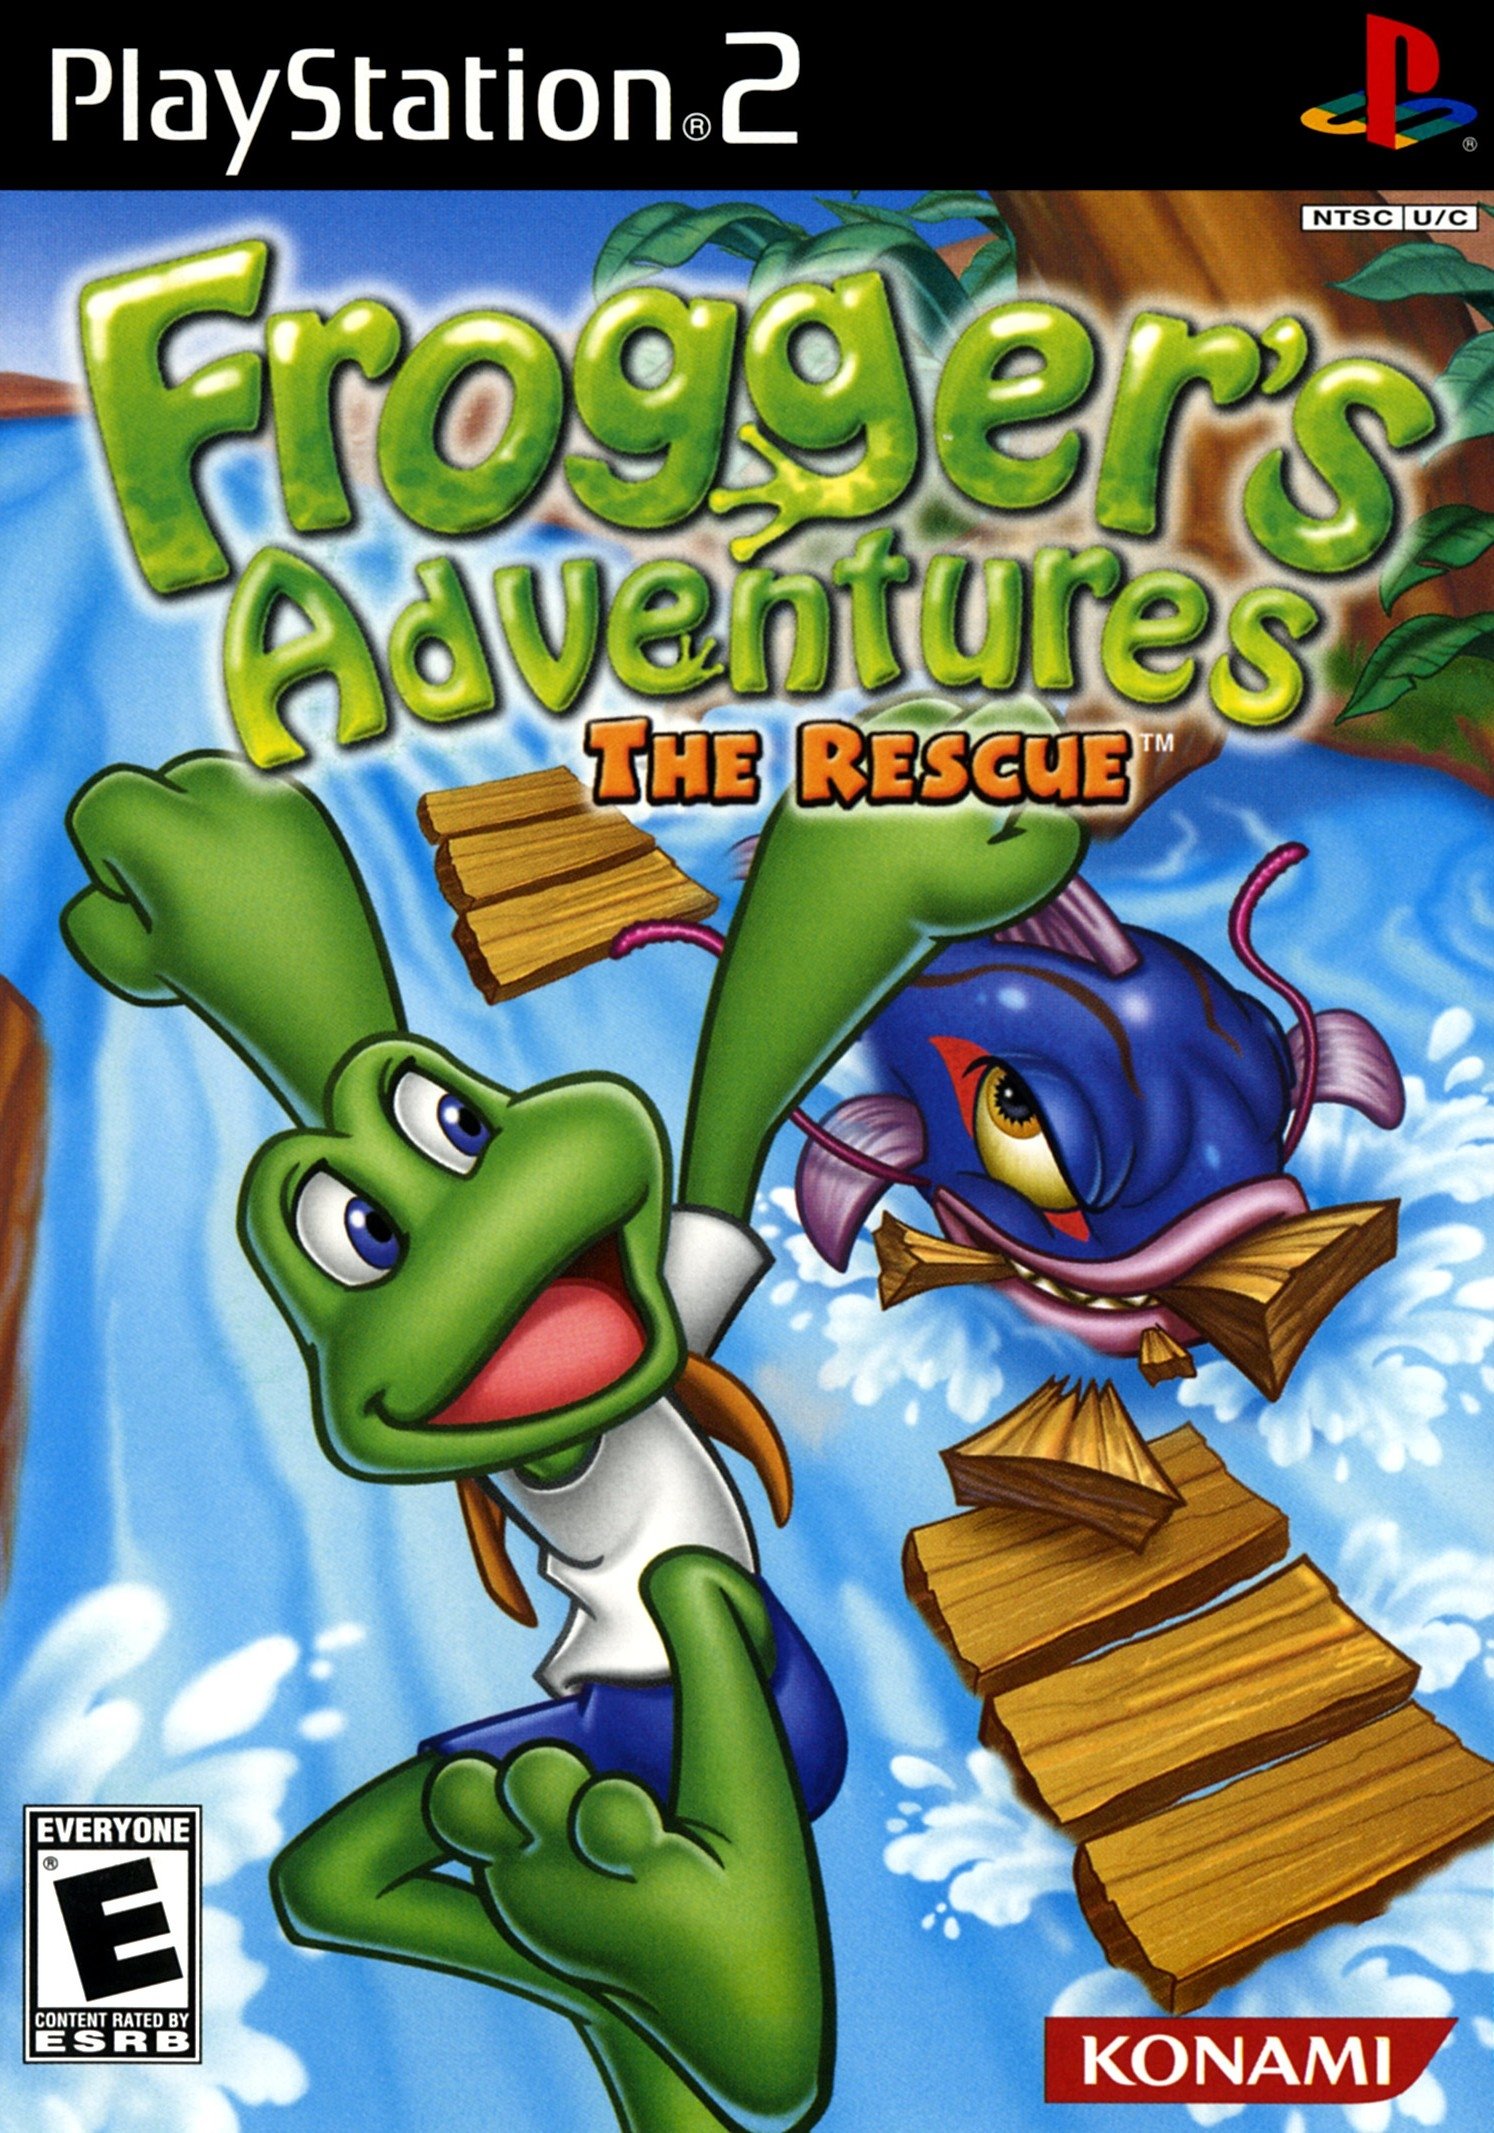 frogger-s-adventures-the-rescue-video-game-box-art-id-48337-image-abyss